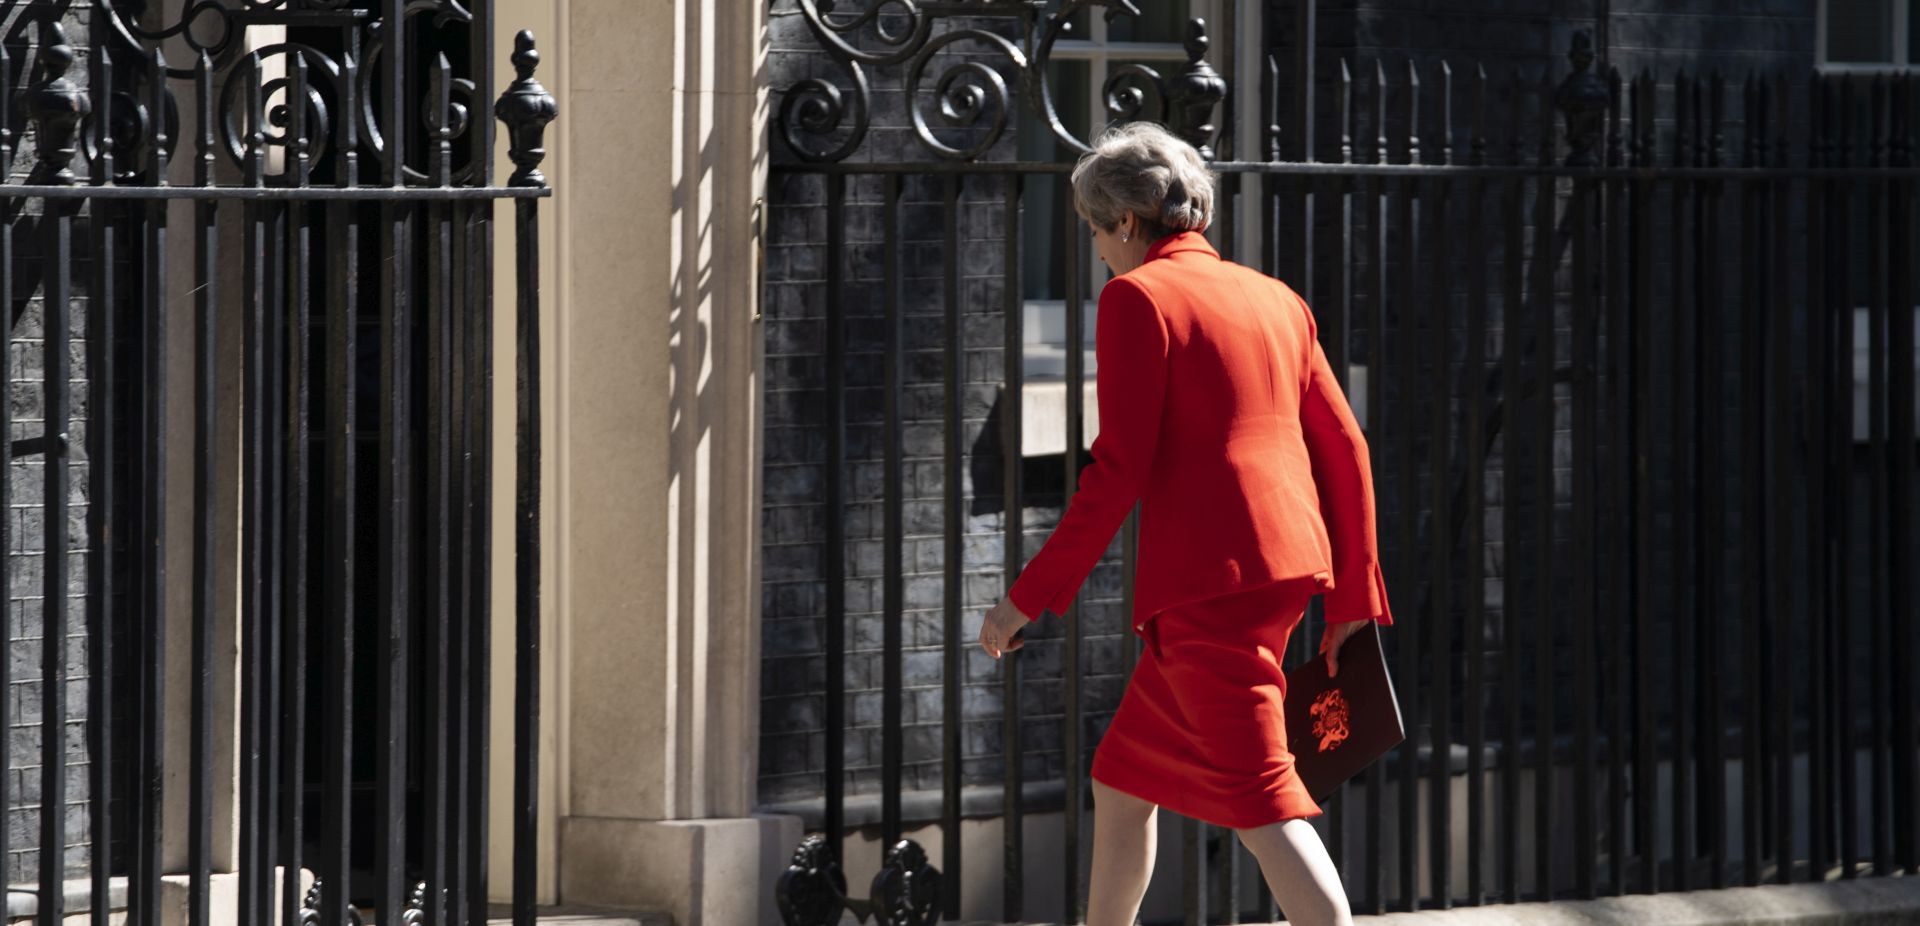 epa07596532 British Prime Minister Theresa May departs after addressing the media to announcing her resignation, outside 10 Downing Street, Central London, Britain, 24 May 2019. Mrs May announced she will resign as Prime Minister on 07 June 2019 in the meantime triggering a leadership contest to succeed her as the leader of the governing Conservative Party.  EPA/WILL OLIVER